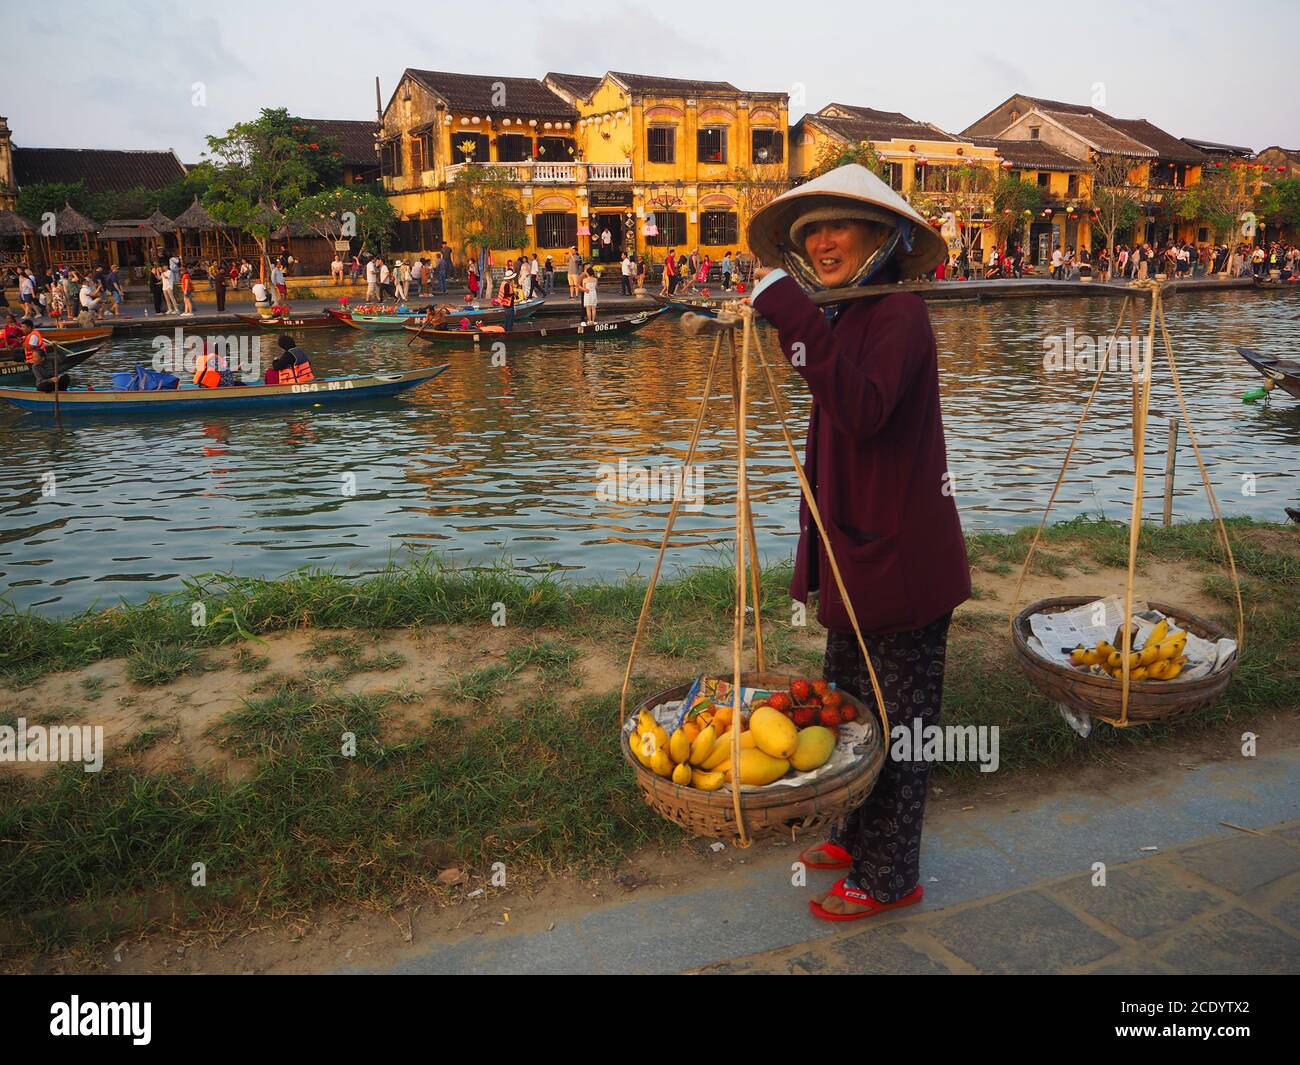 A Vietnamese fruit seller on the banks of the Thu Bon River, Hoi An, Quang Nam Province, Vietnam Stock Photo